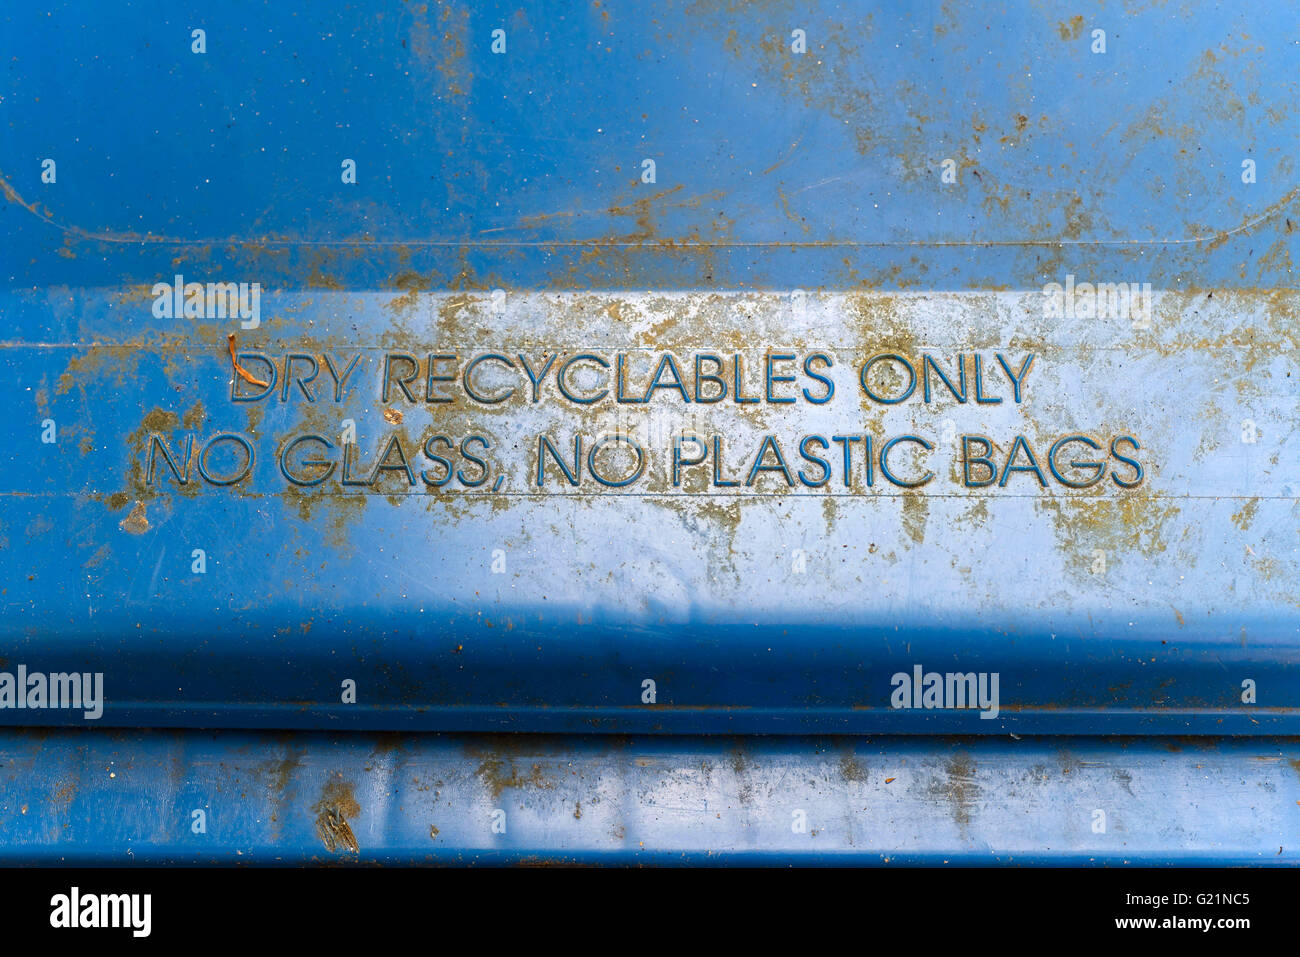 dry recyclables only no glass no plastic bags on blue bin` Stock Photo